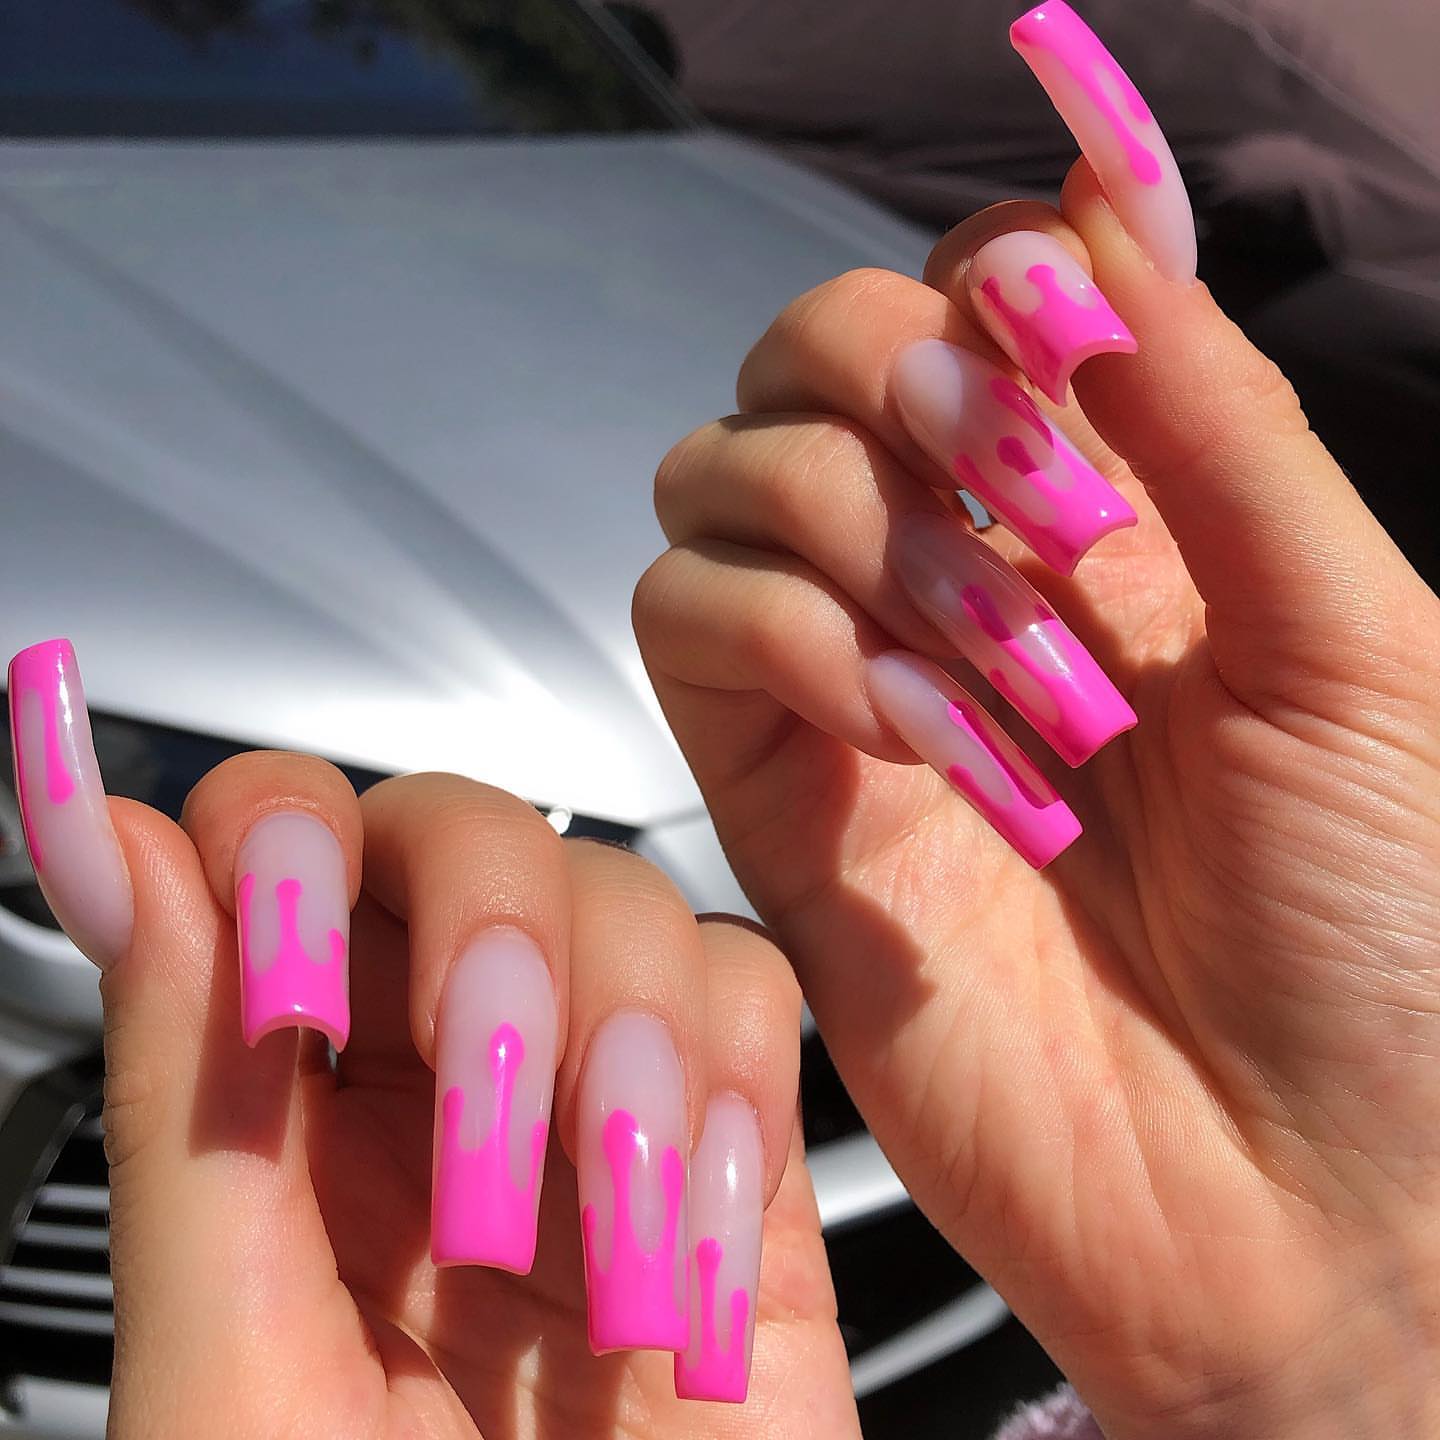 Pamper, An On-Demand Manicure And Pedicure Service, Wants To Reinvent The  Troubled Nail Salon Industry | TechCrunch